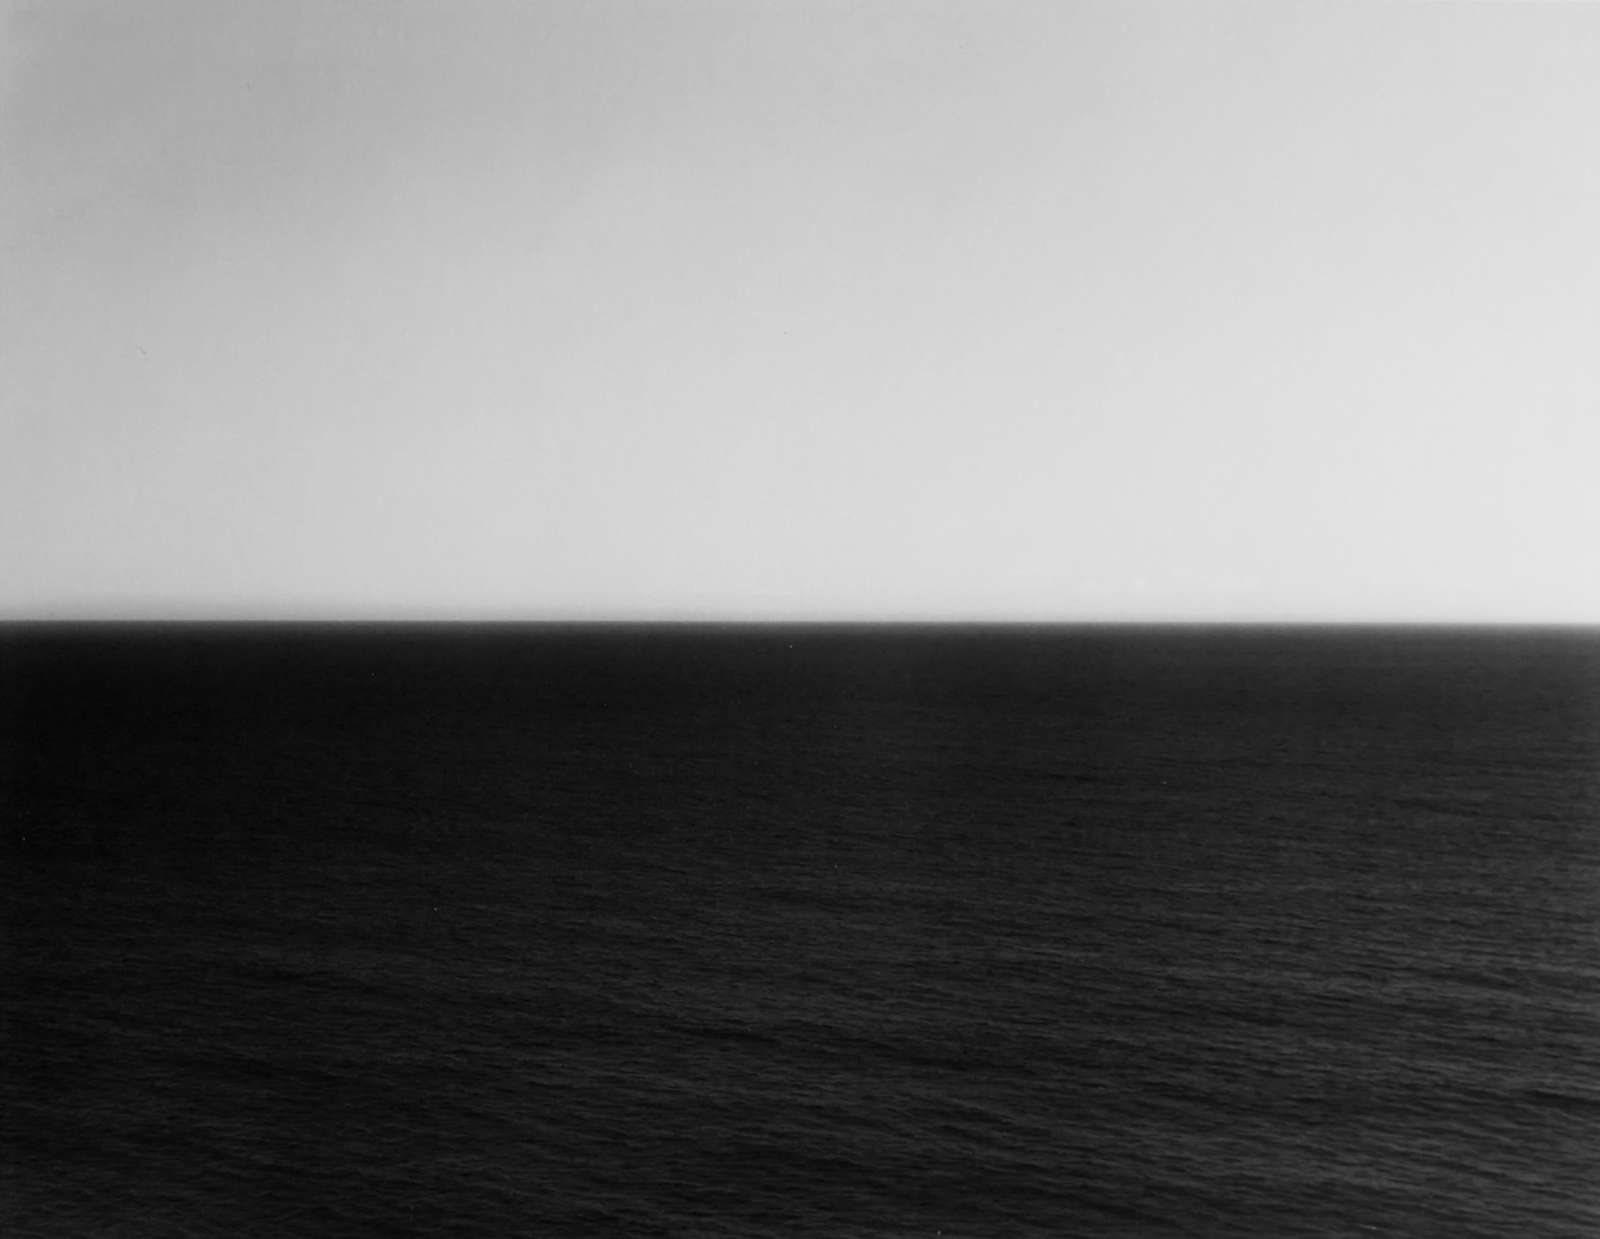 Hiroshi Sugimoto, South Pacific Ocean, Waihau, 327 (from 'Time Exposed' published in 1991), 1990